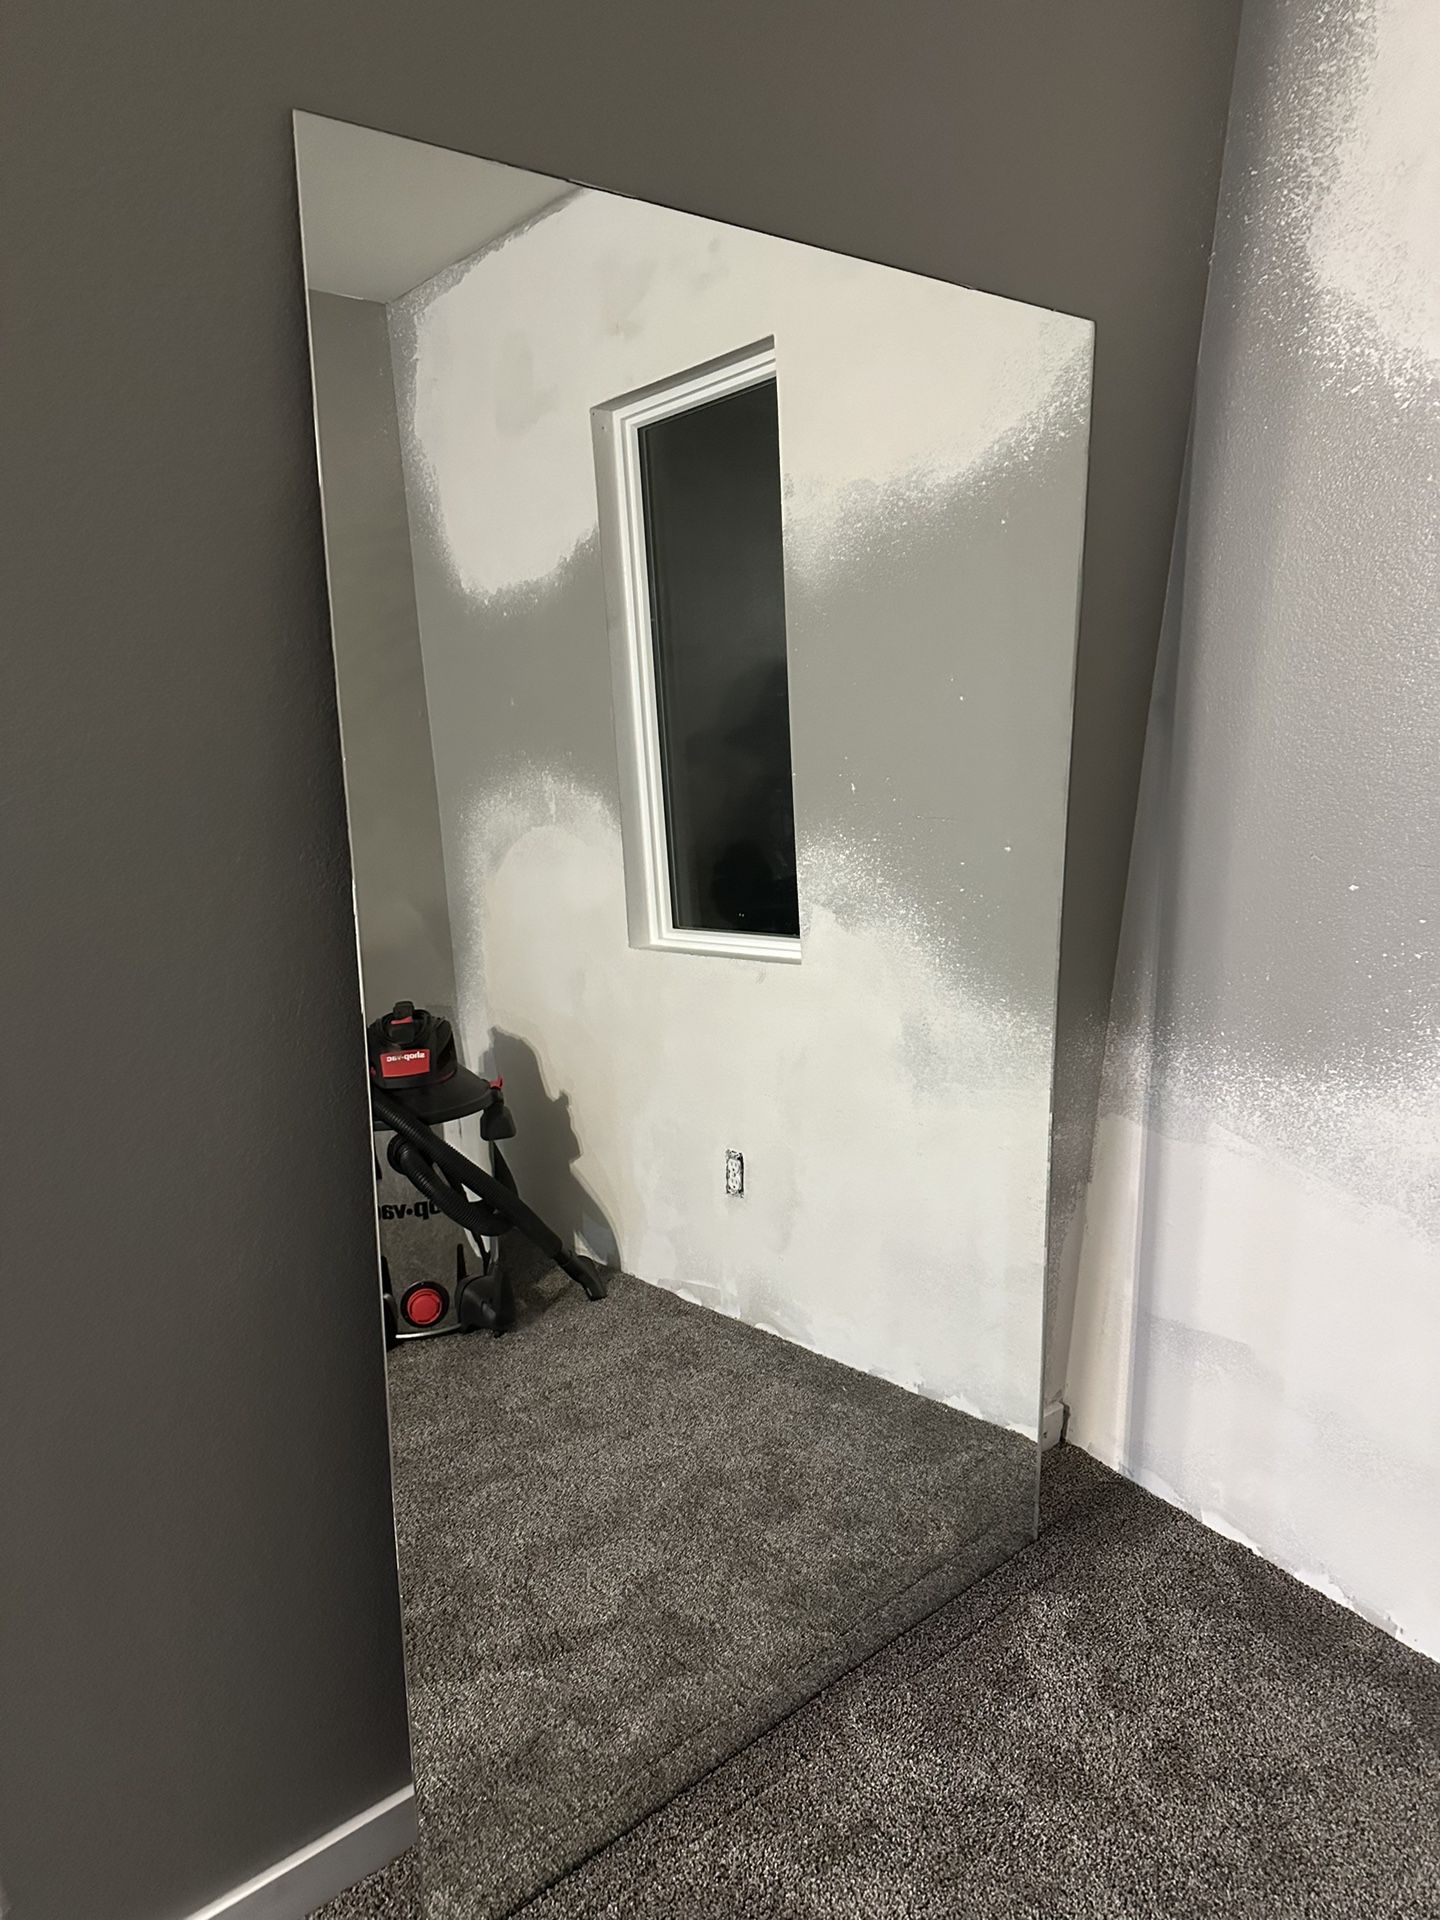 Large Mirror FREE - First Come First Serve NO HOLDS